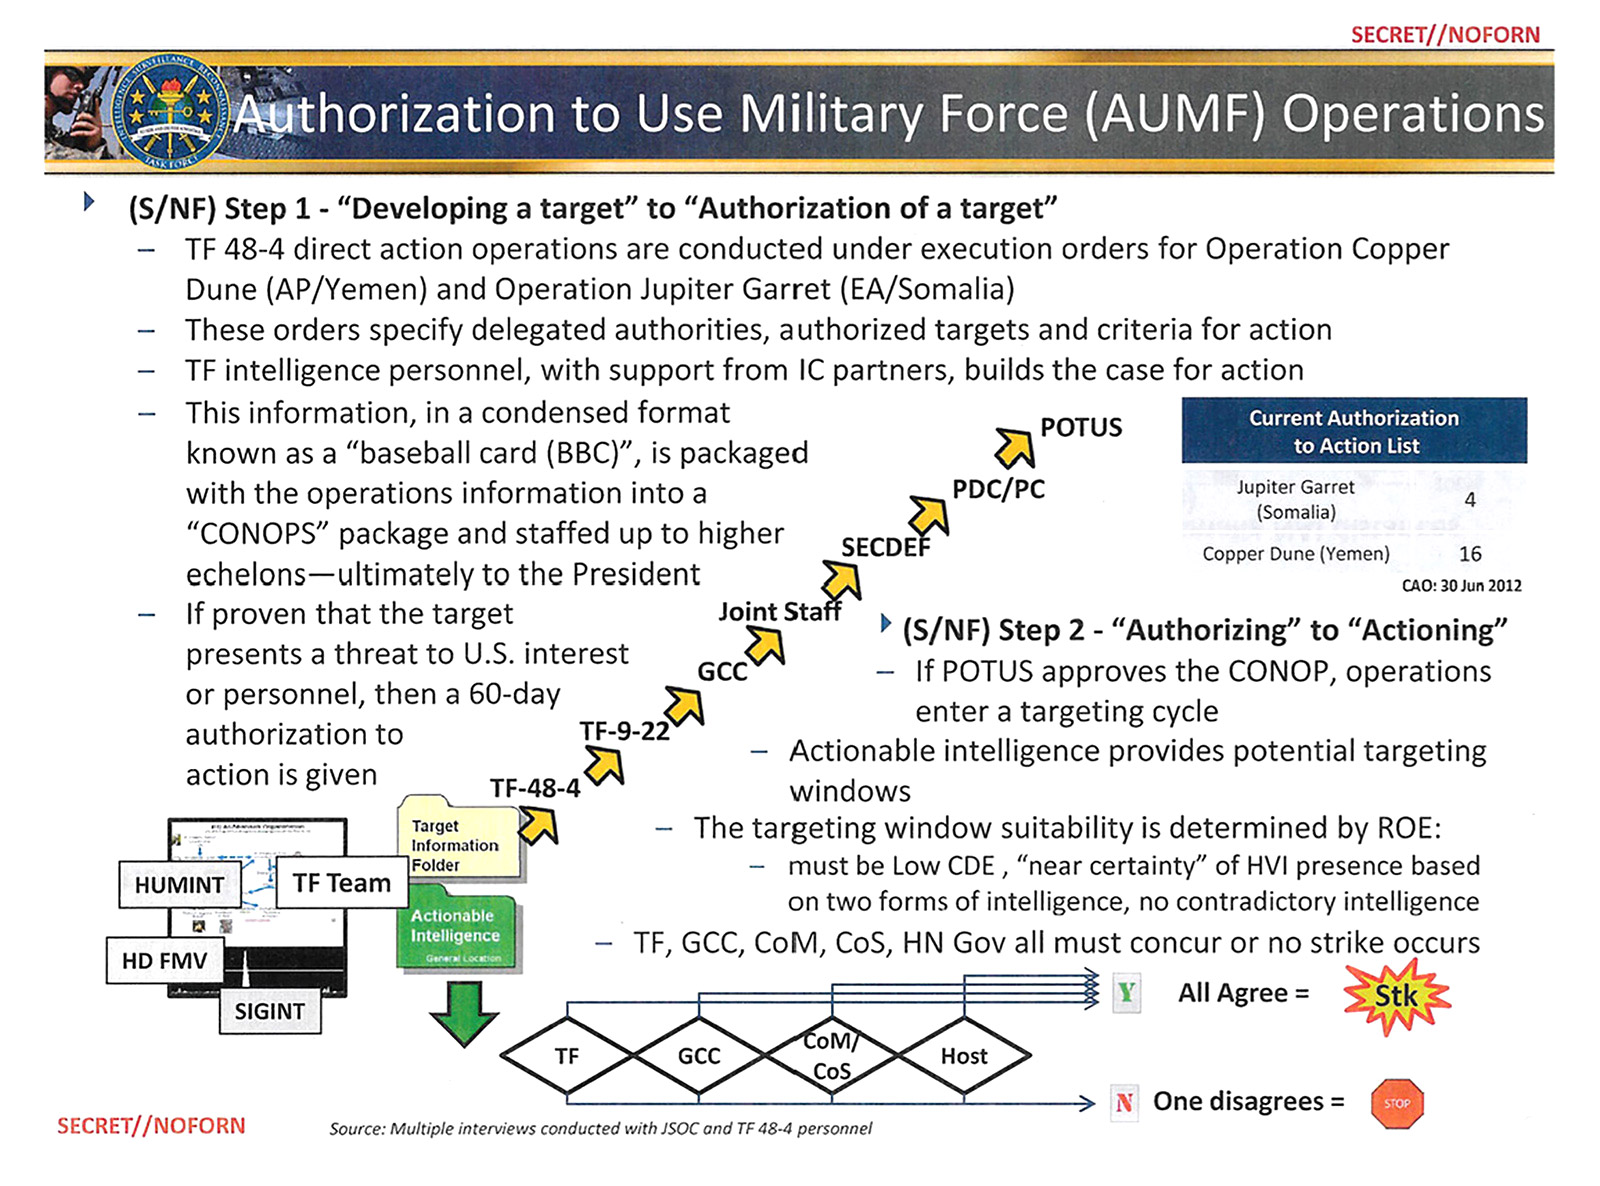 A May two thousand and thirteen slide leaked from a Pentagon presentation. It details the path followed by dossiers on people deemed targets by a United States Joint Special Operations Command task force in Yemen and Somalia.